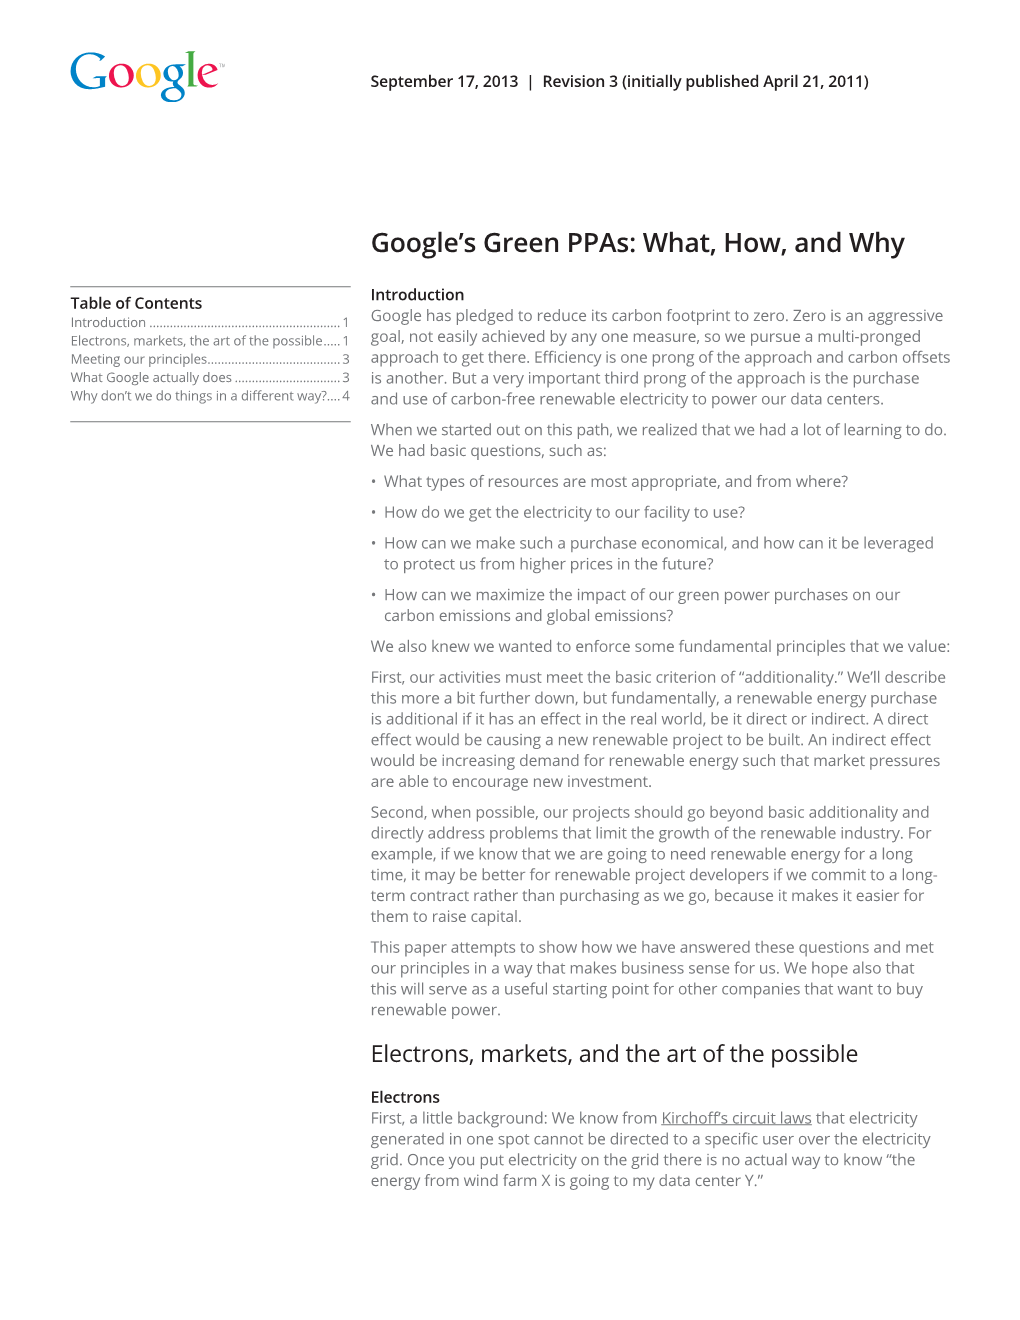 Google's Green Ppas: What, How, And